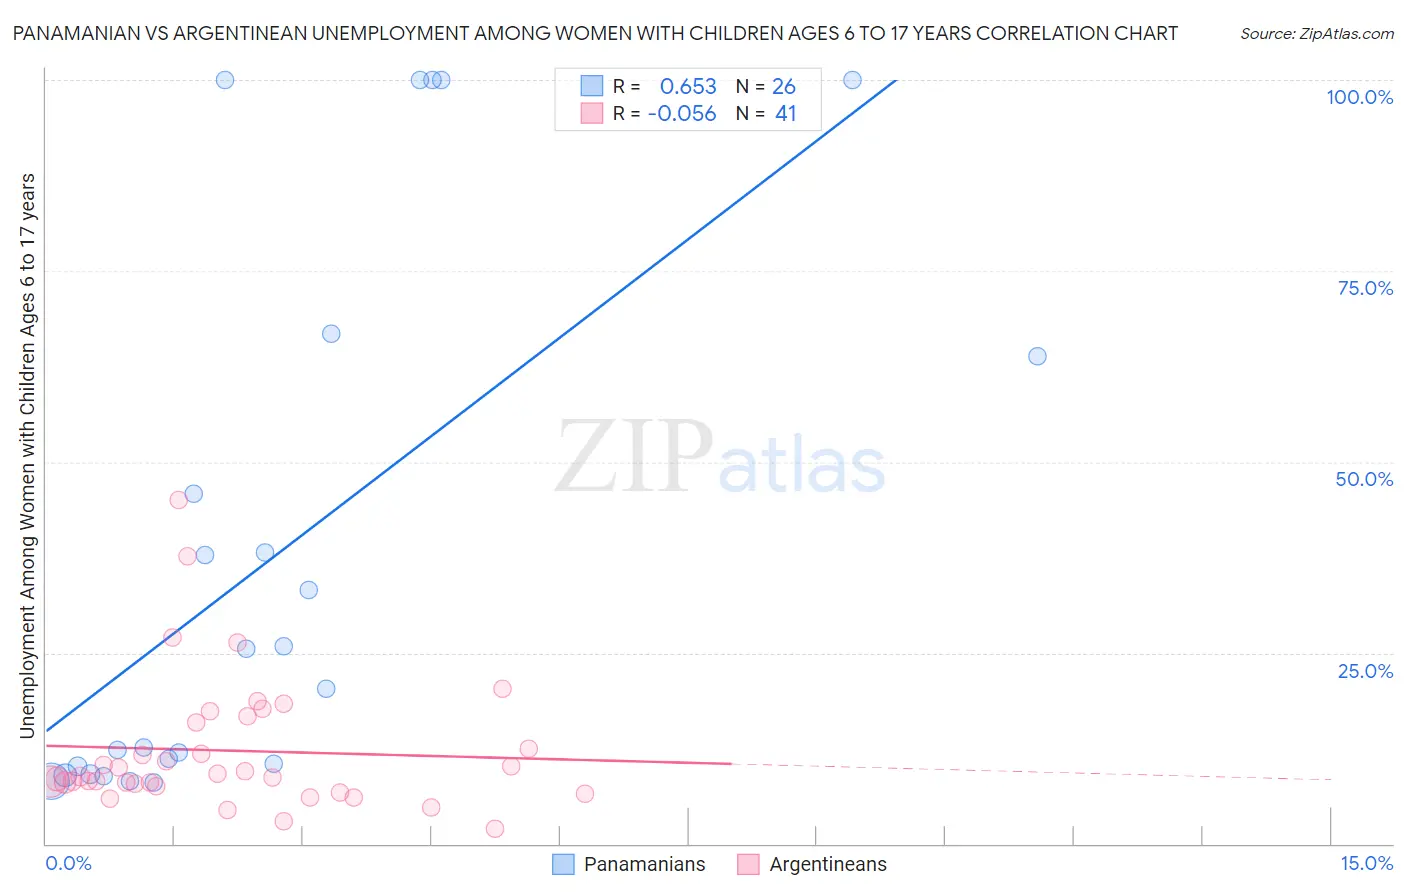 Panamanian vs Argentinean Unemployment Among Women with Children Ages 6 to 17 years